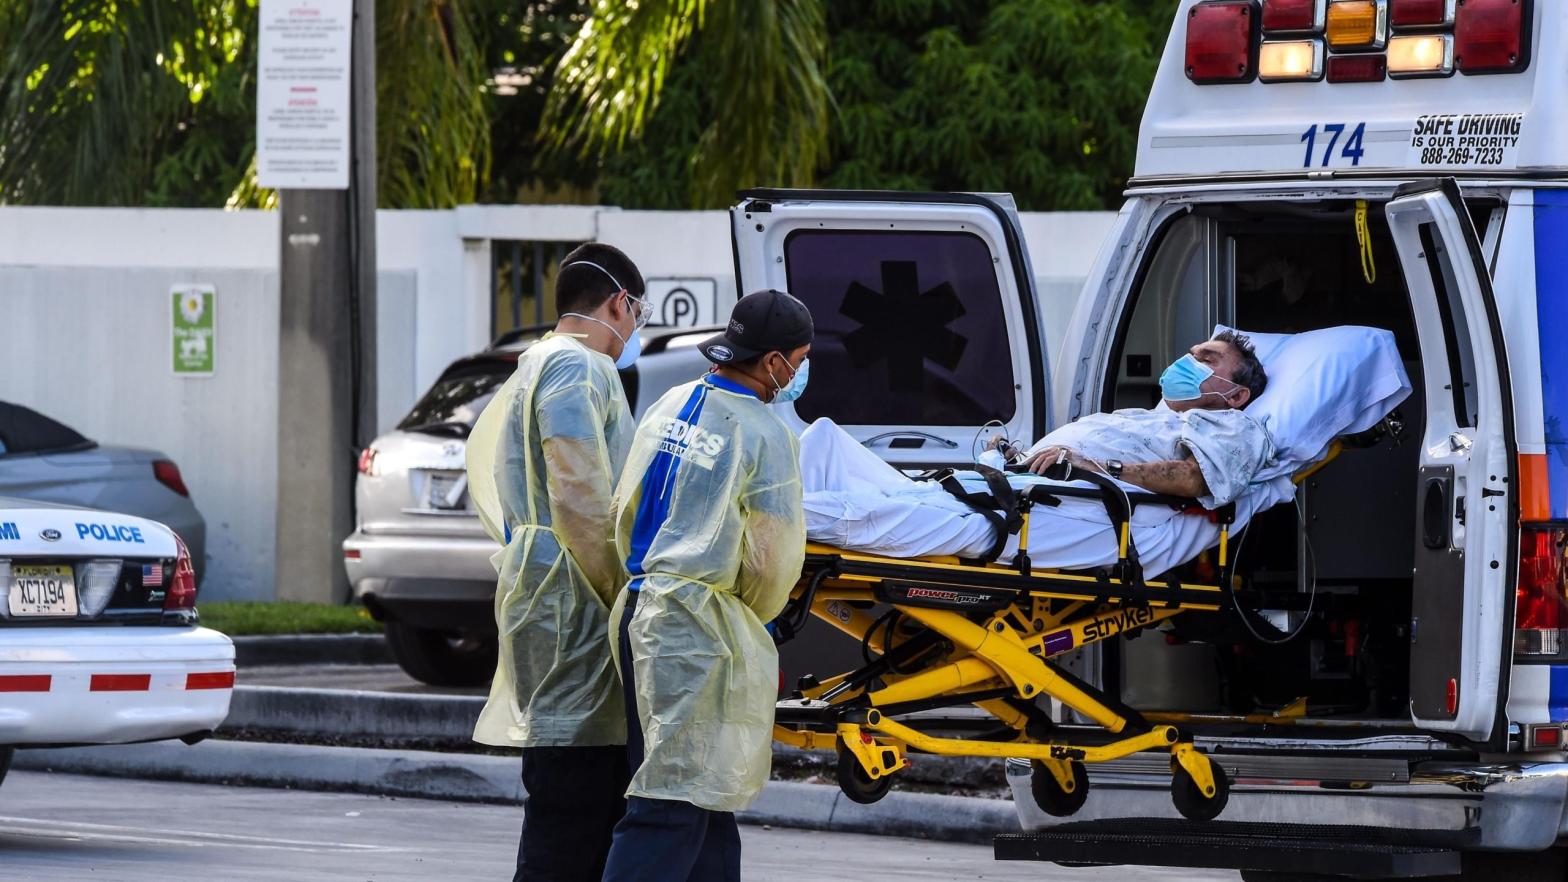 Medics transfer a patient on a stretcher from an ambulance outside of Emergency at Coral Gables Hospital where coronavirus patients are treated in Coral Gables near Miami, on July 30, 2020. (Photo: Chadan Khanna/AFP, Getty Images)